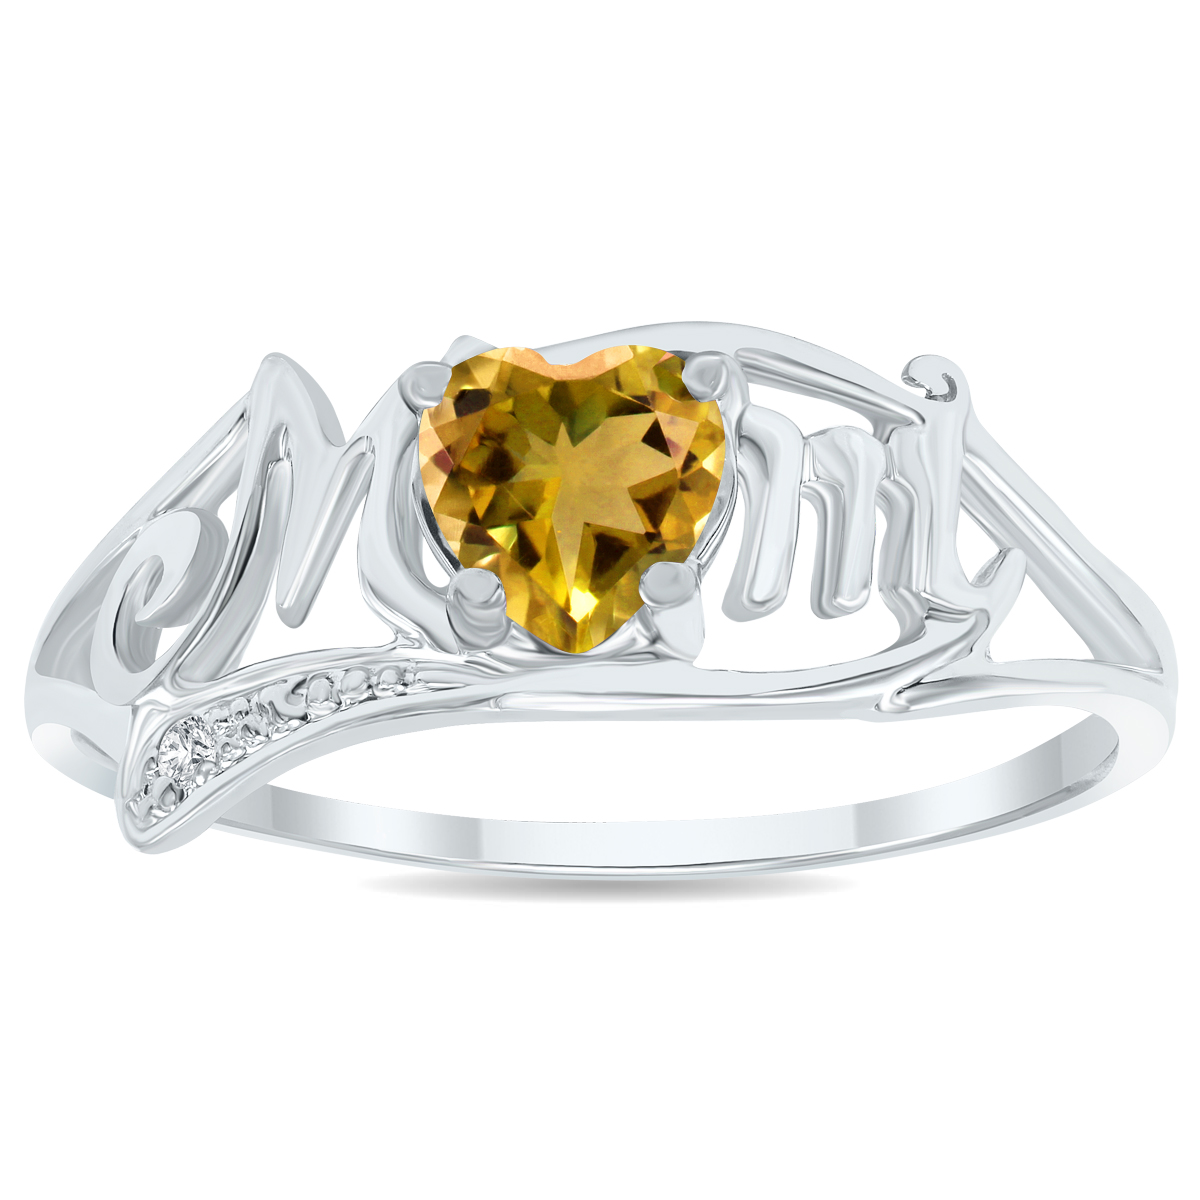 Citrine and Diamond Heart Shaped MOM Ring in 10K White Gold